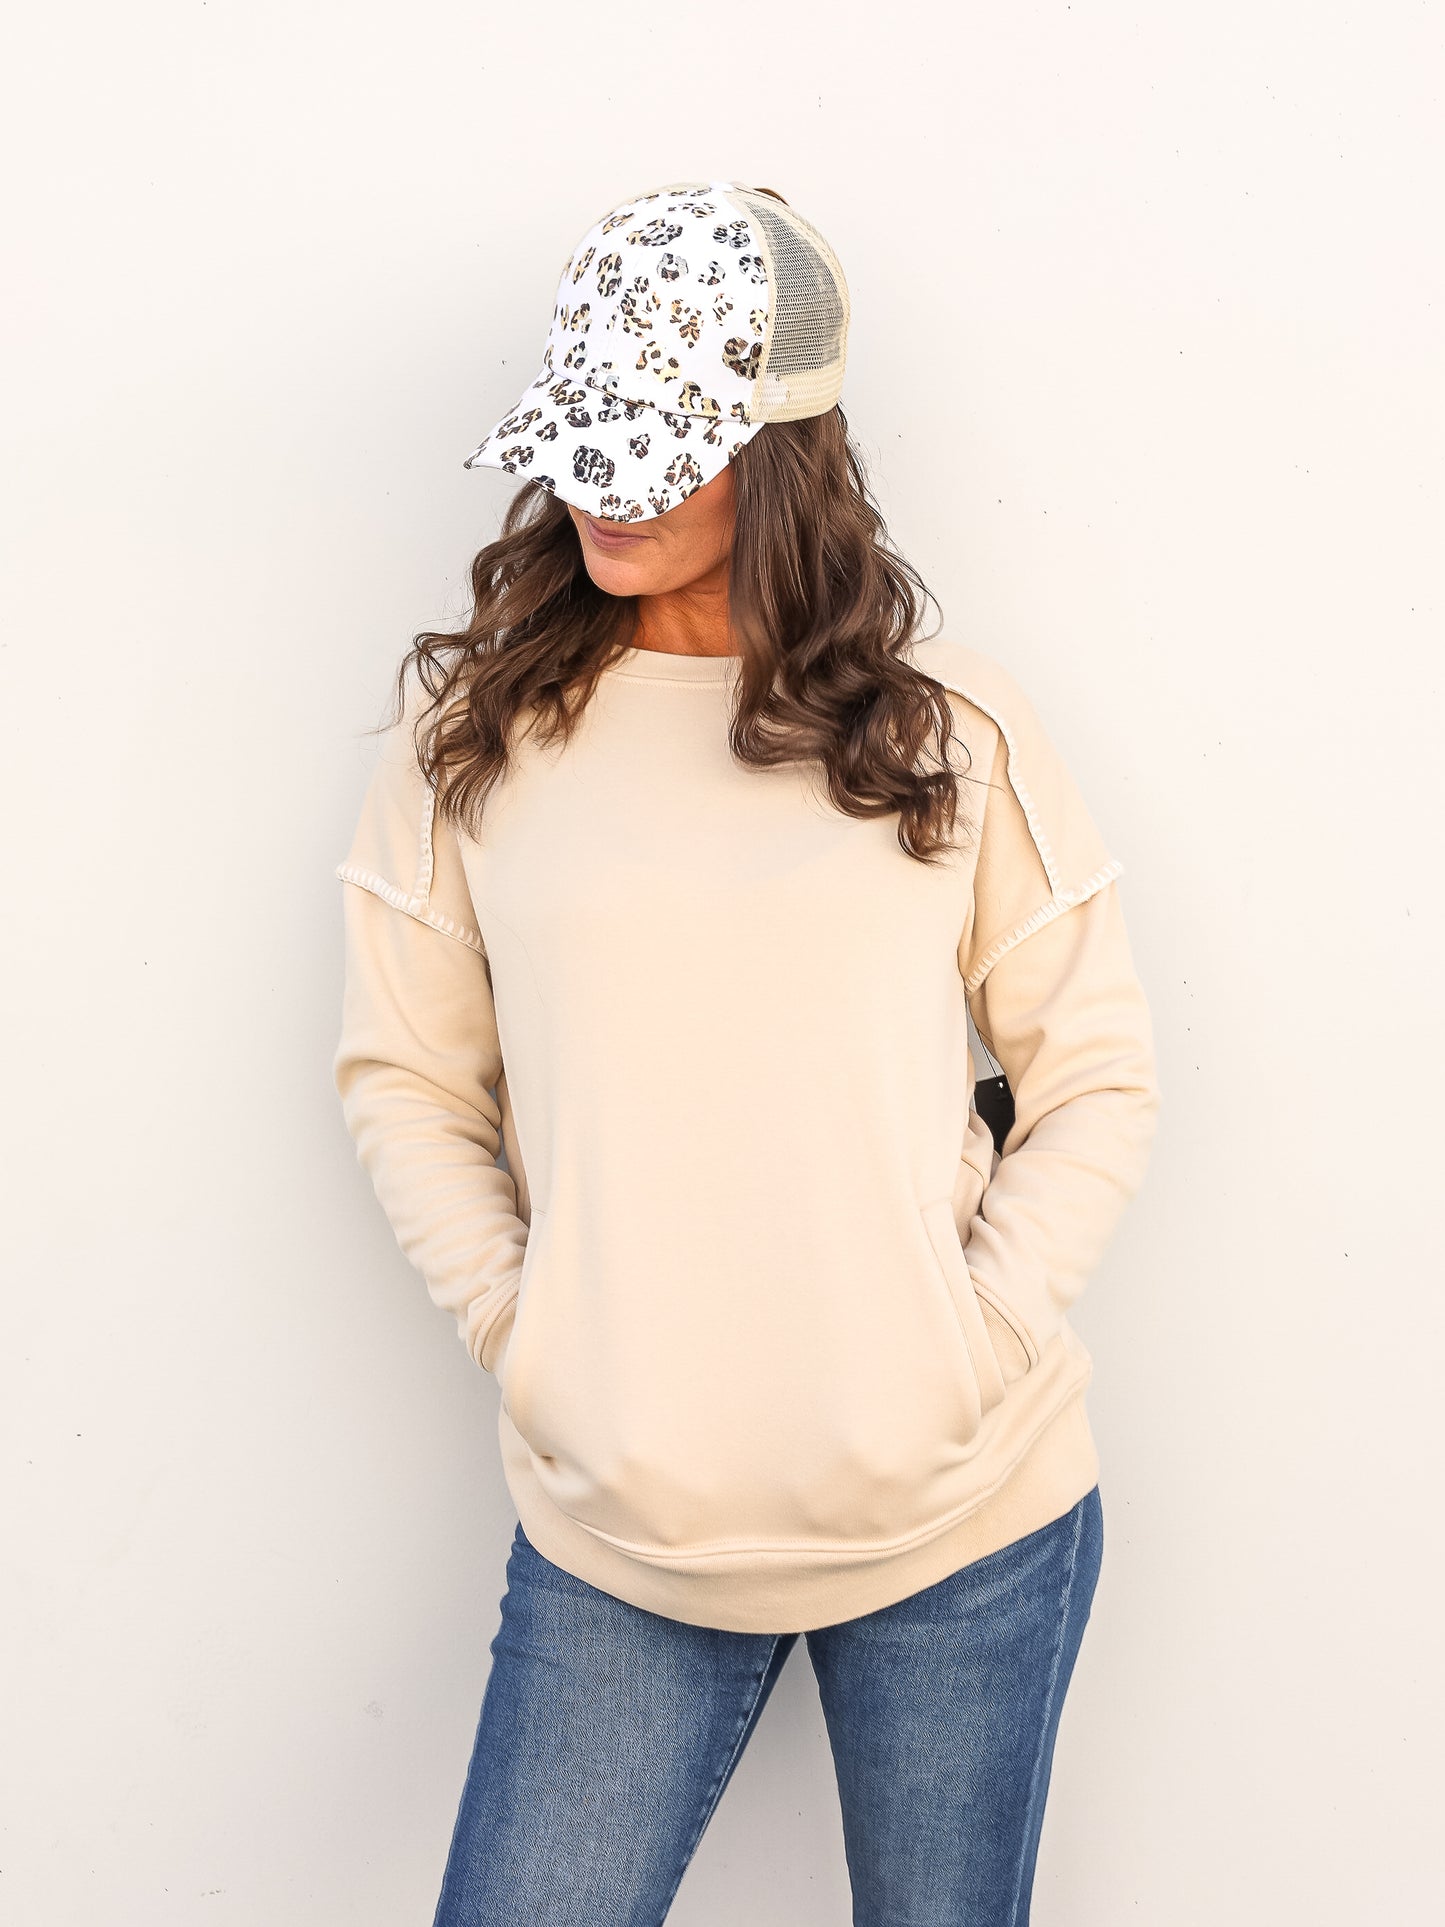 Cozy cream colored crew neck sweater with a leopard hat and jeans